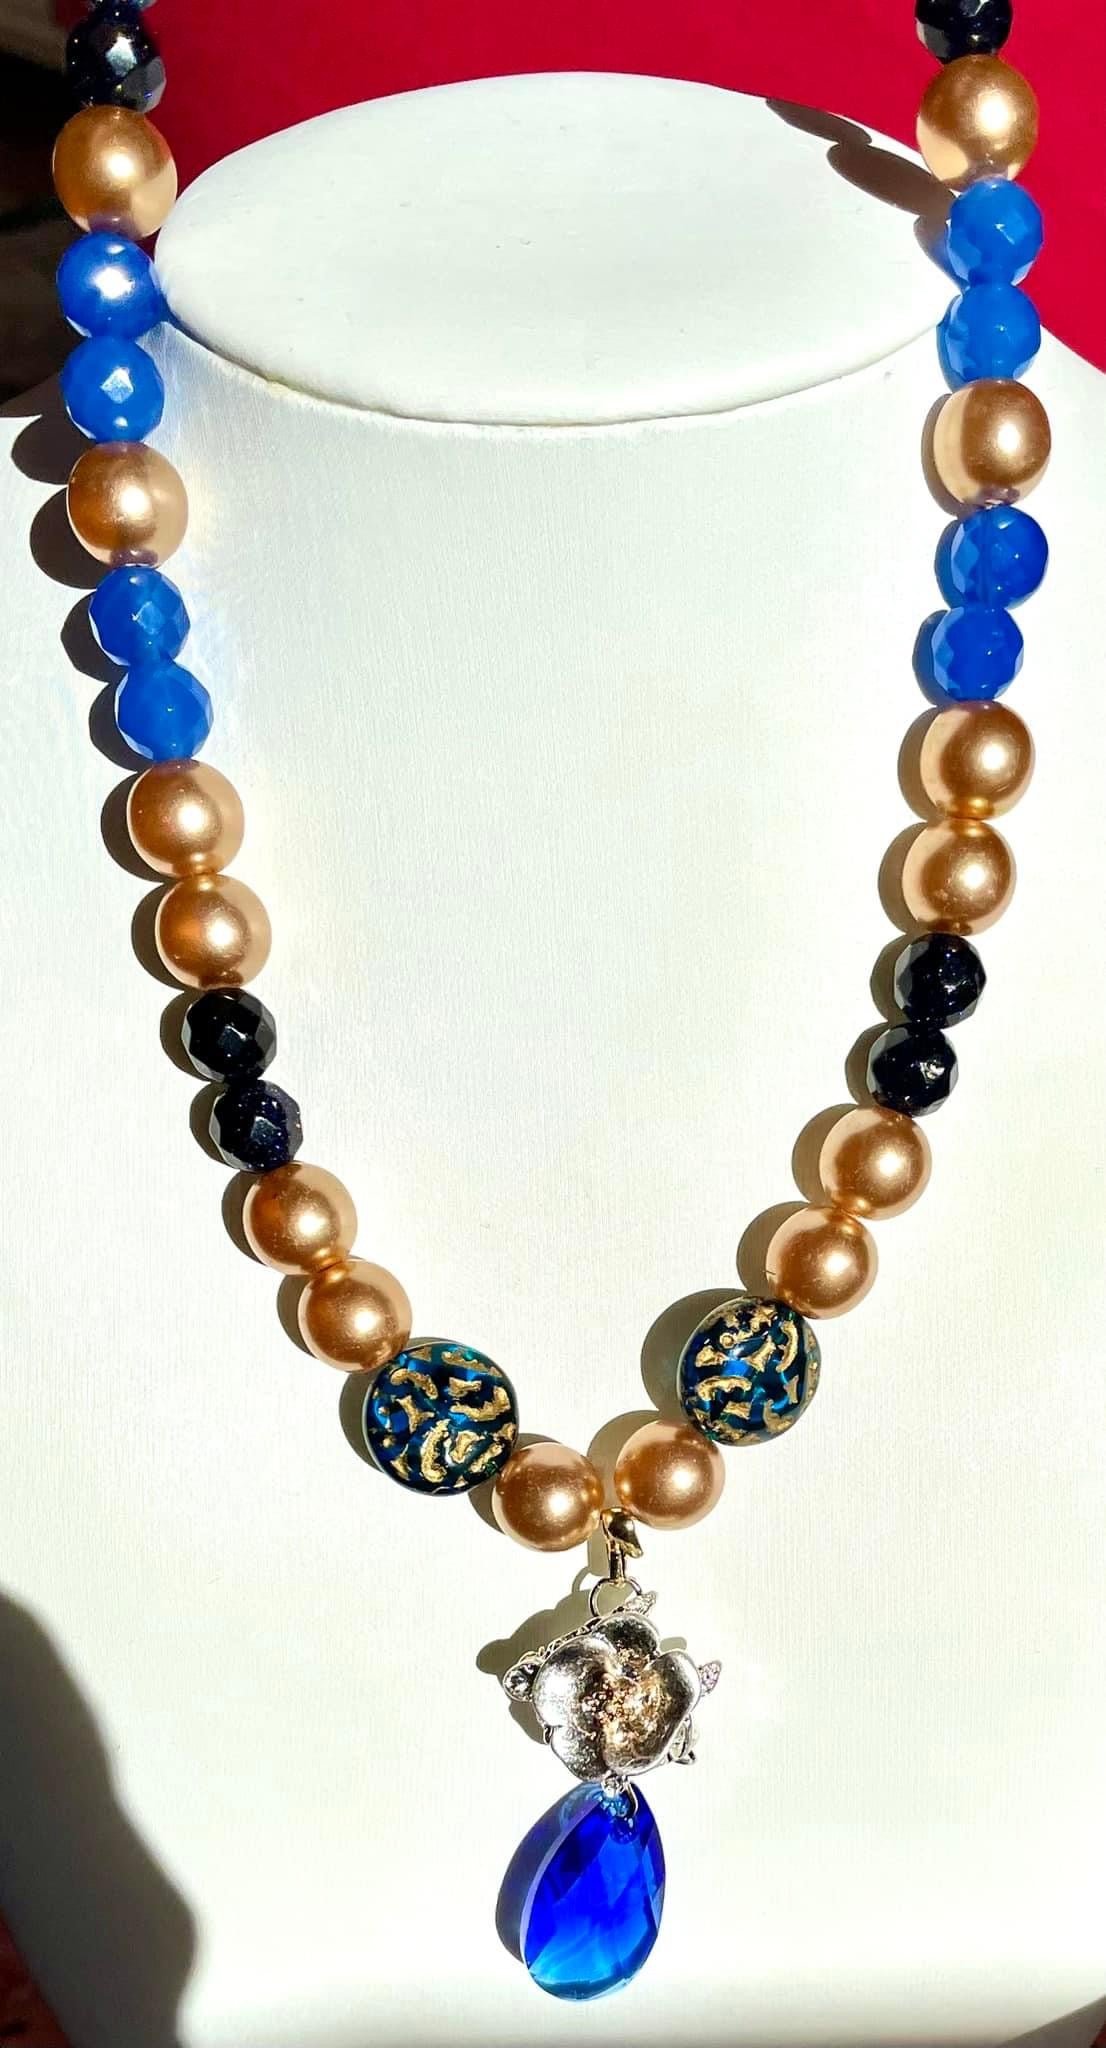 Blue and gold pearls beads necklace with pendant